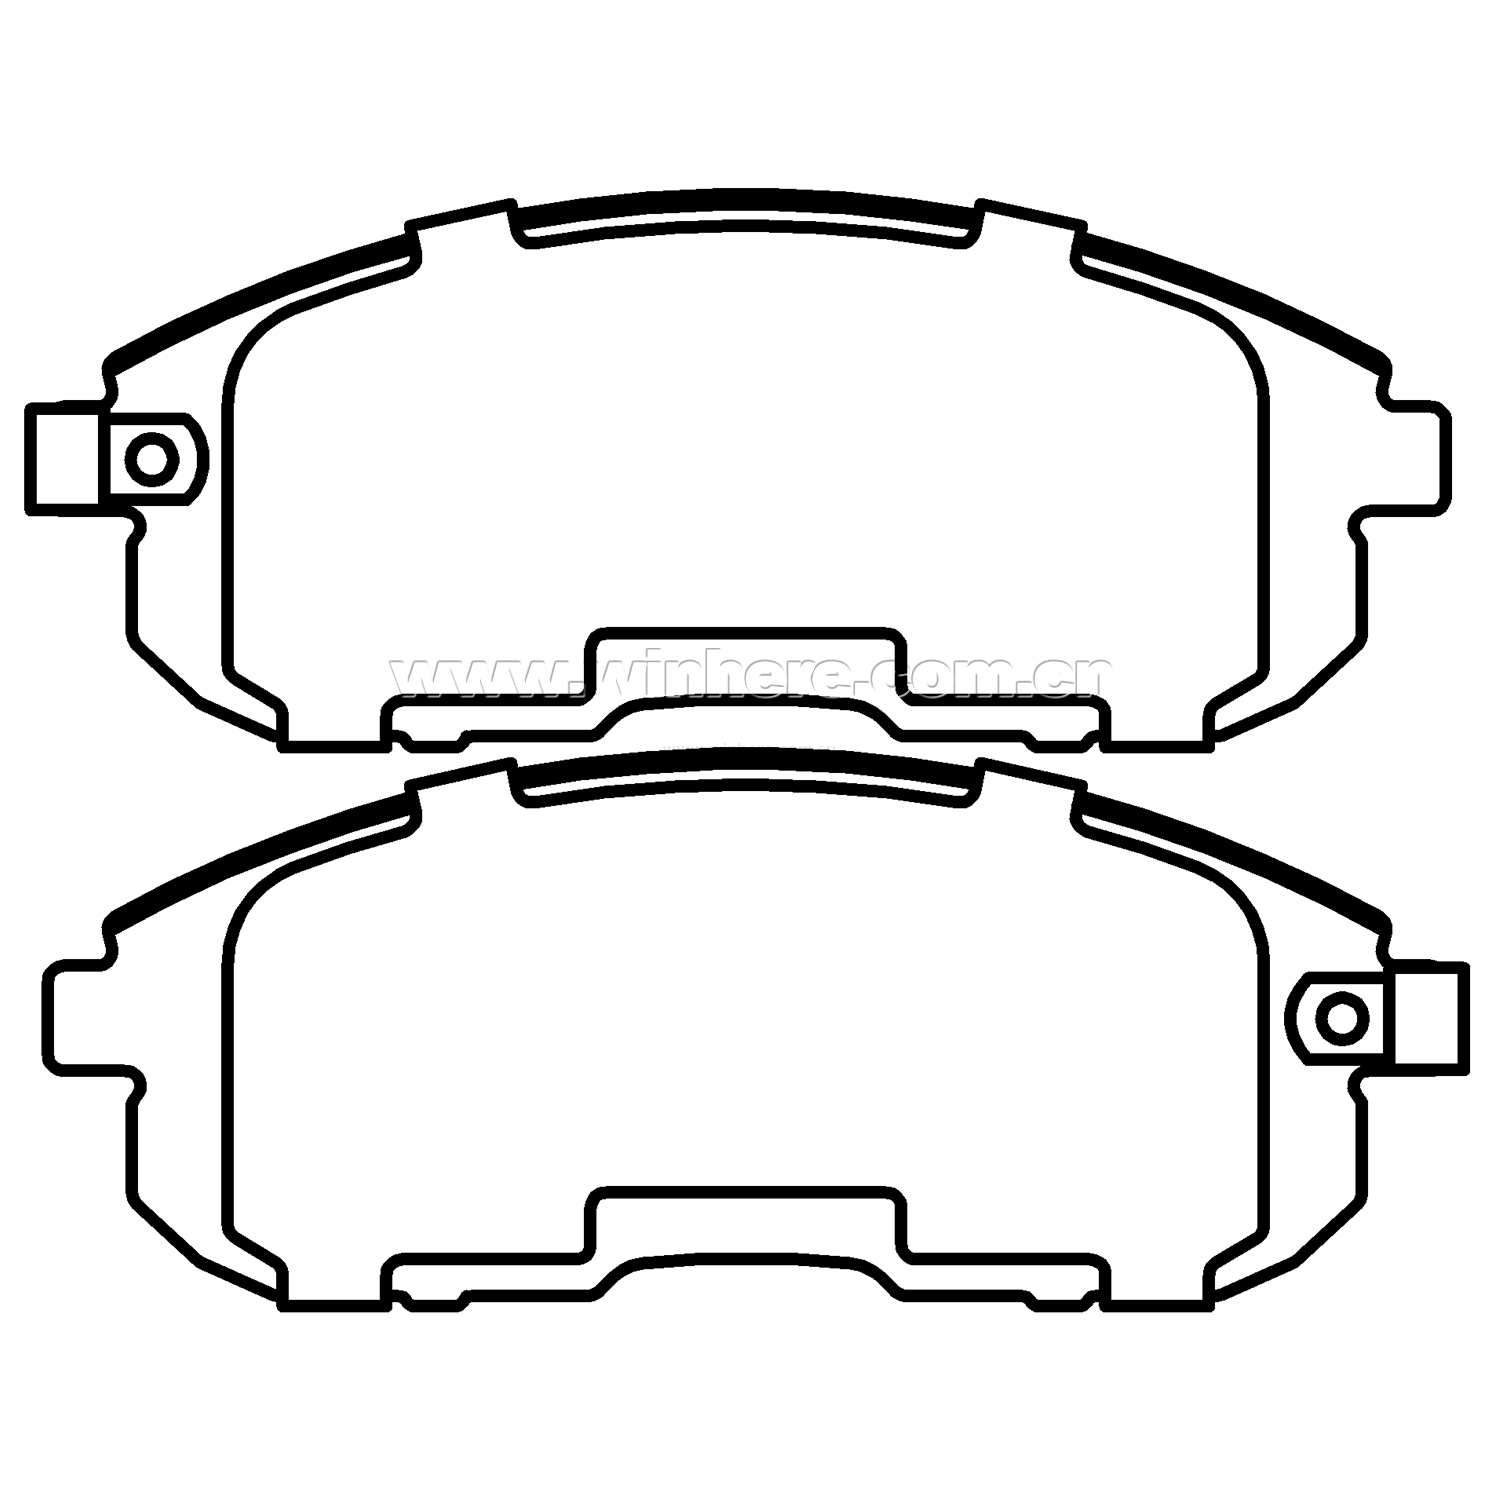 Dustless Brake Pad for NISSAN Front ECE R90